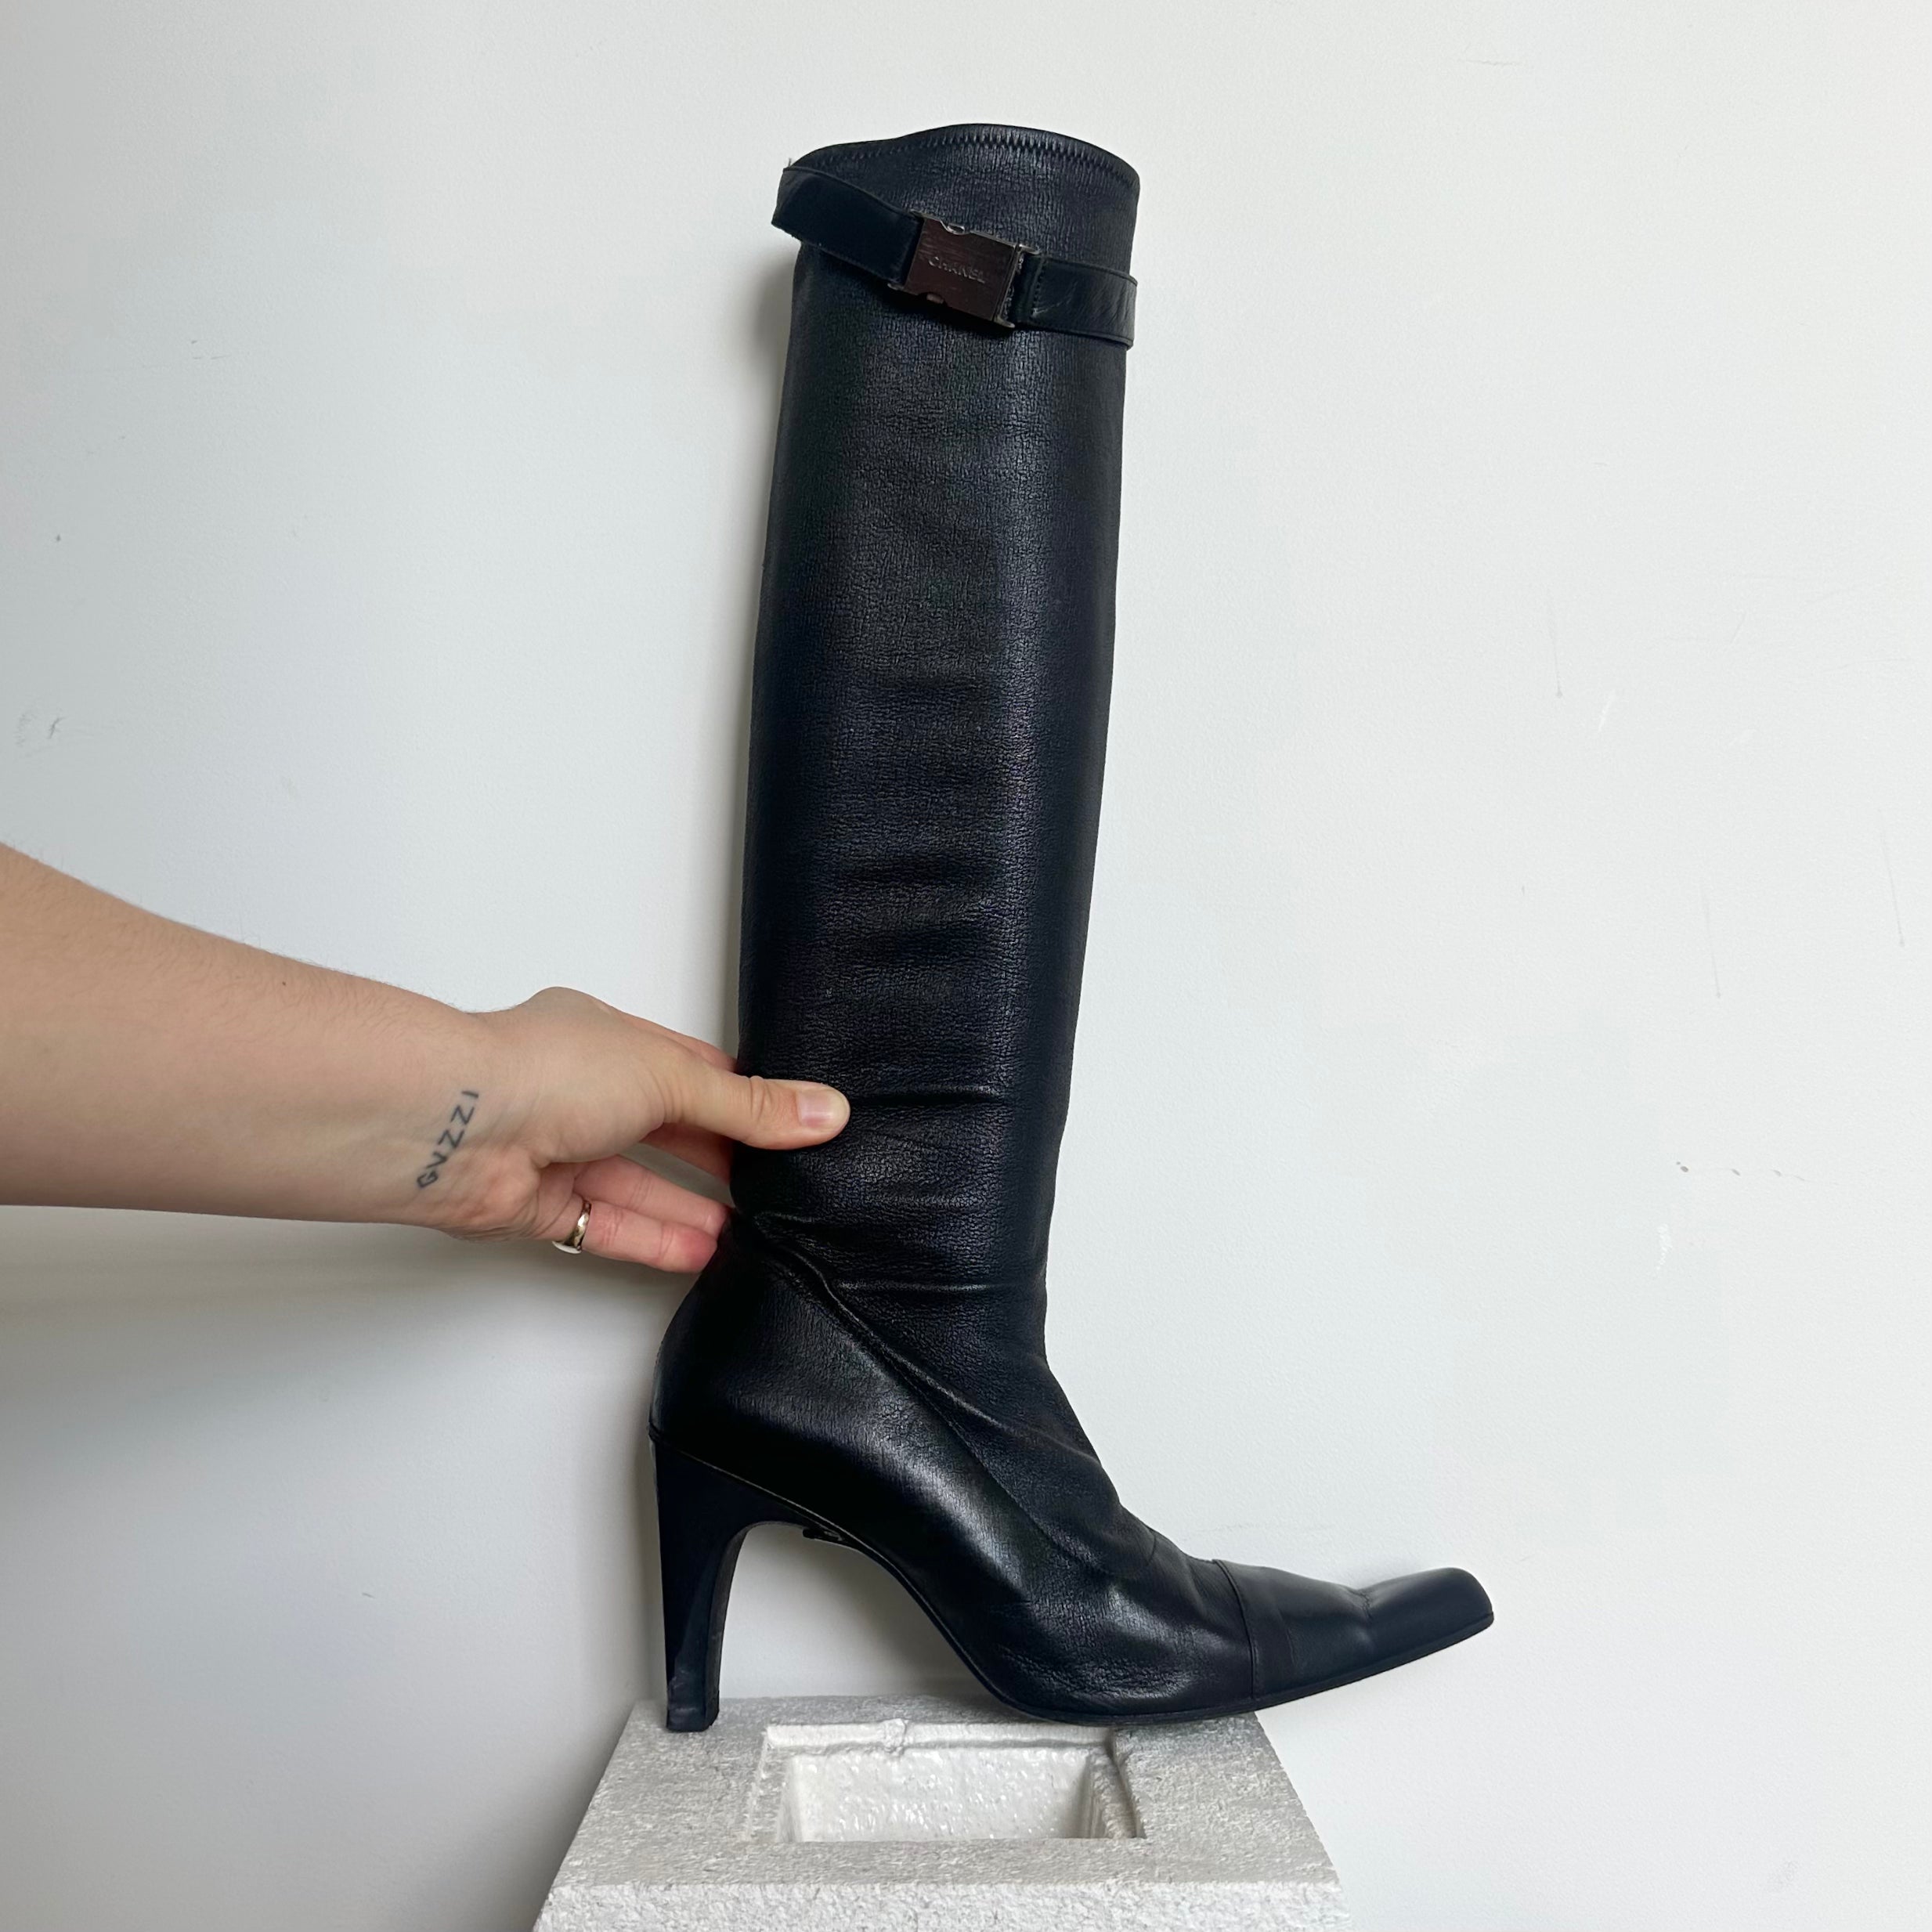 Chanel Leather Knee High Boots with Buckle Detail (38-39)